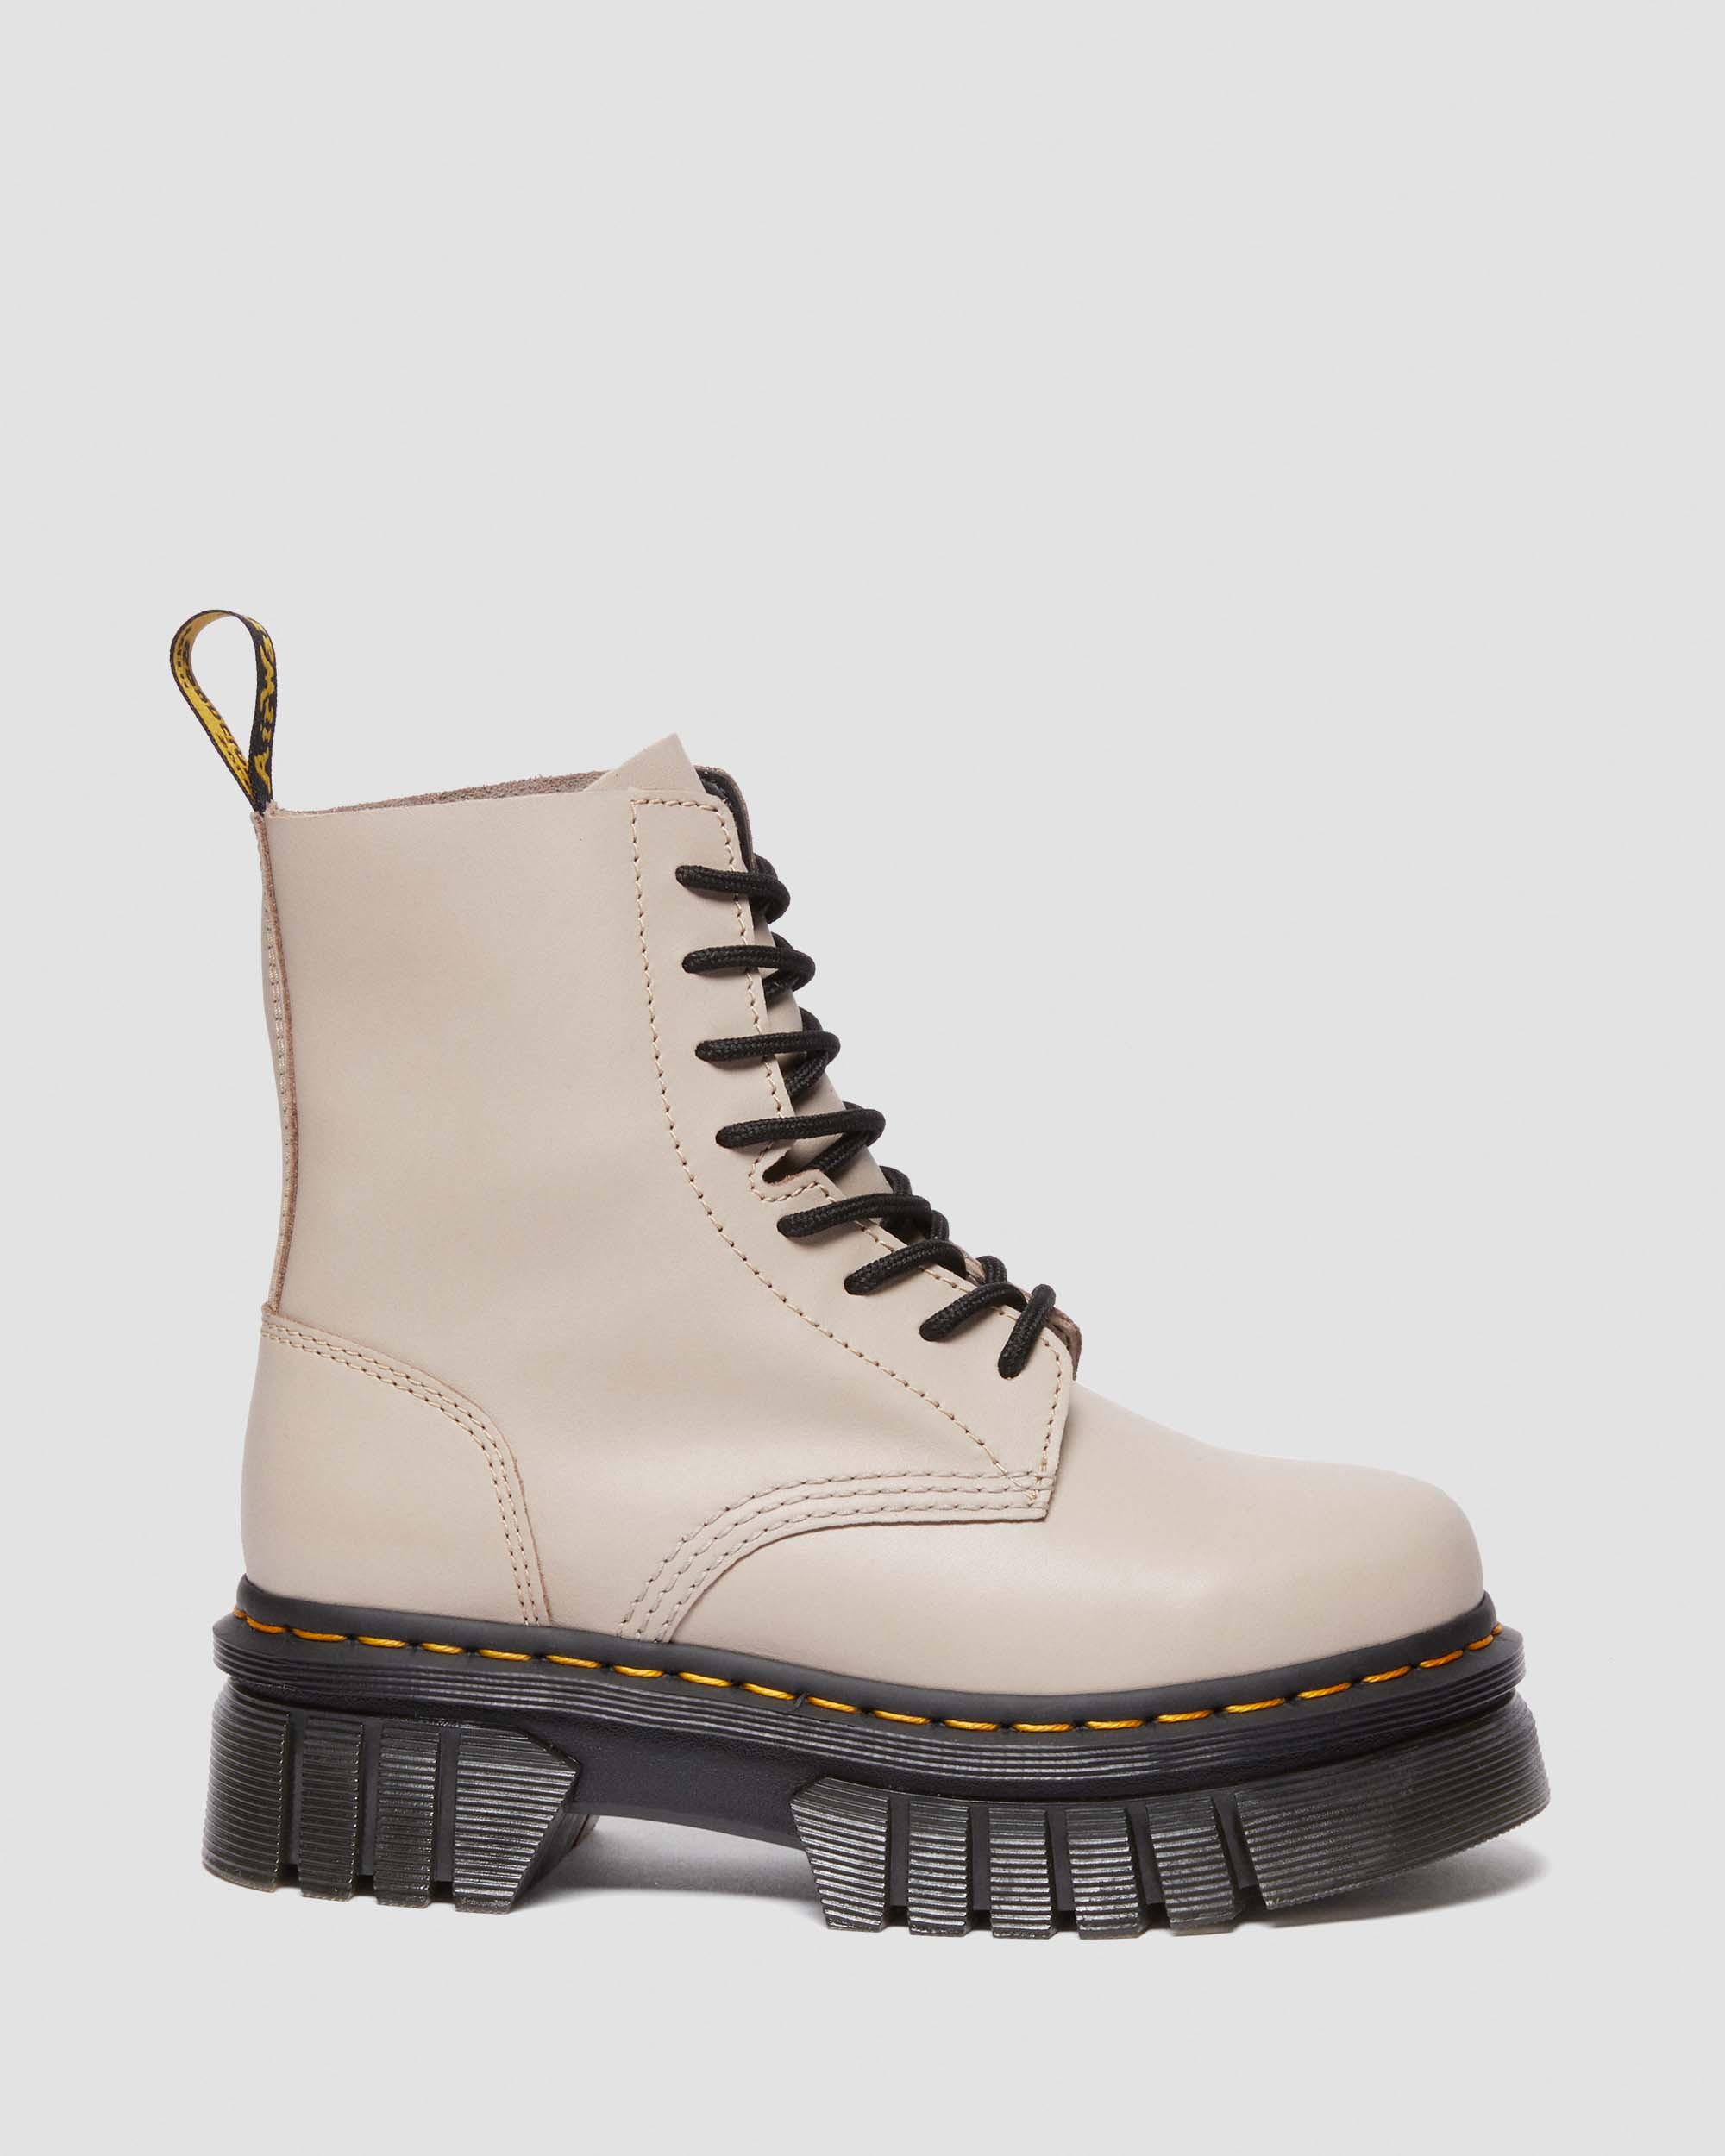 Audrick Nappa Lux Platform Ankle Boots in Vintage Taupe | Dr. Martens